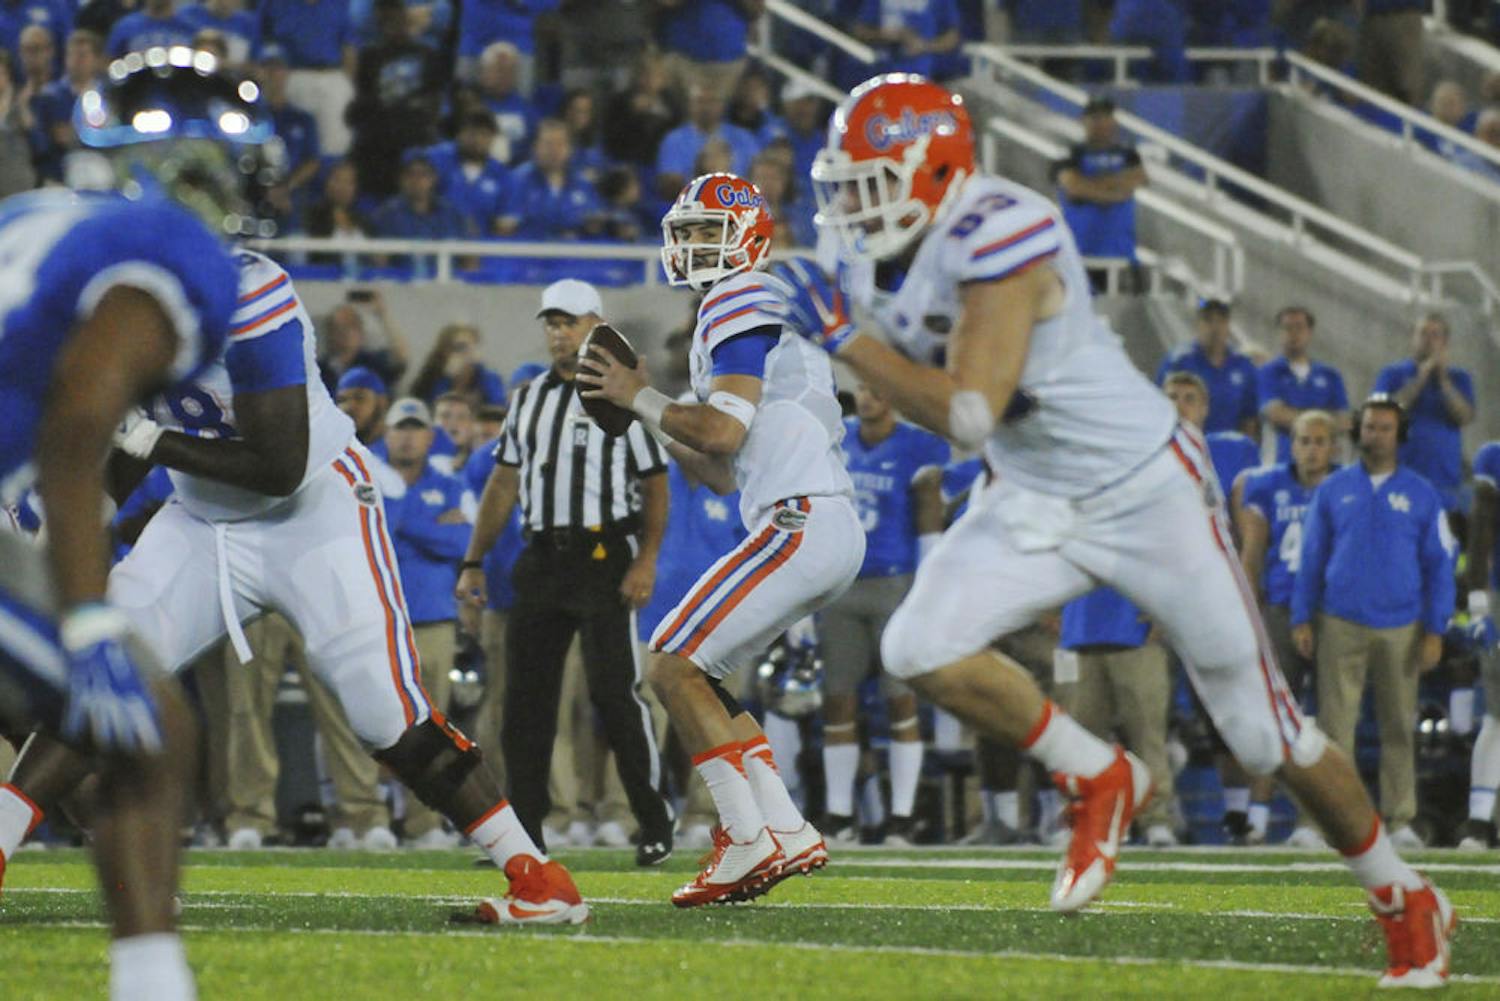 UF quarterback Will Grier drops back to pass during Florida's 14-9 win against Kentucky on Sept. 19, 2015,&nbsp;at Commonwealth Stadium in Lexington, Kentucky.